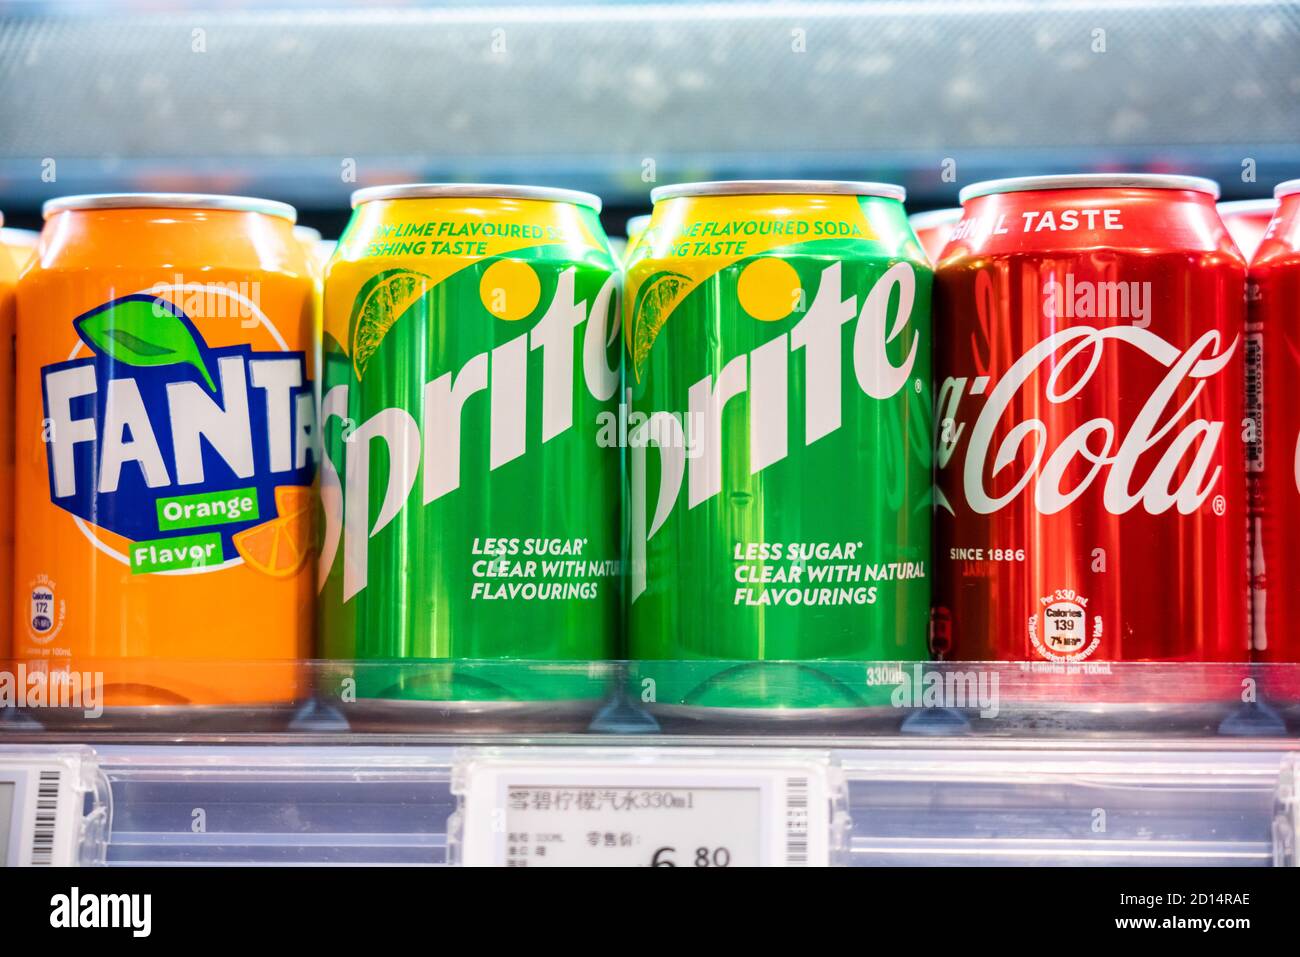 https://c8.alamy.com/comp/2D14RAE/cans-of-coca-cola-sprite-and-fanta-beverages-produced-by-the-coca-cola-company-seen-displayed-in-a-supermarket-2D14RAE.jpg